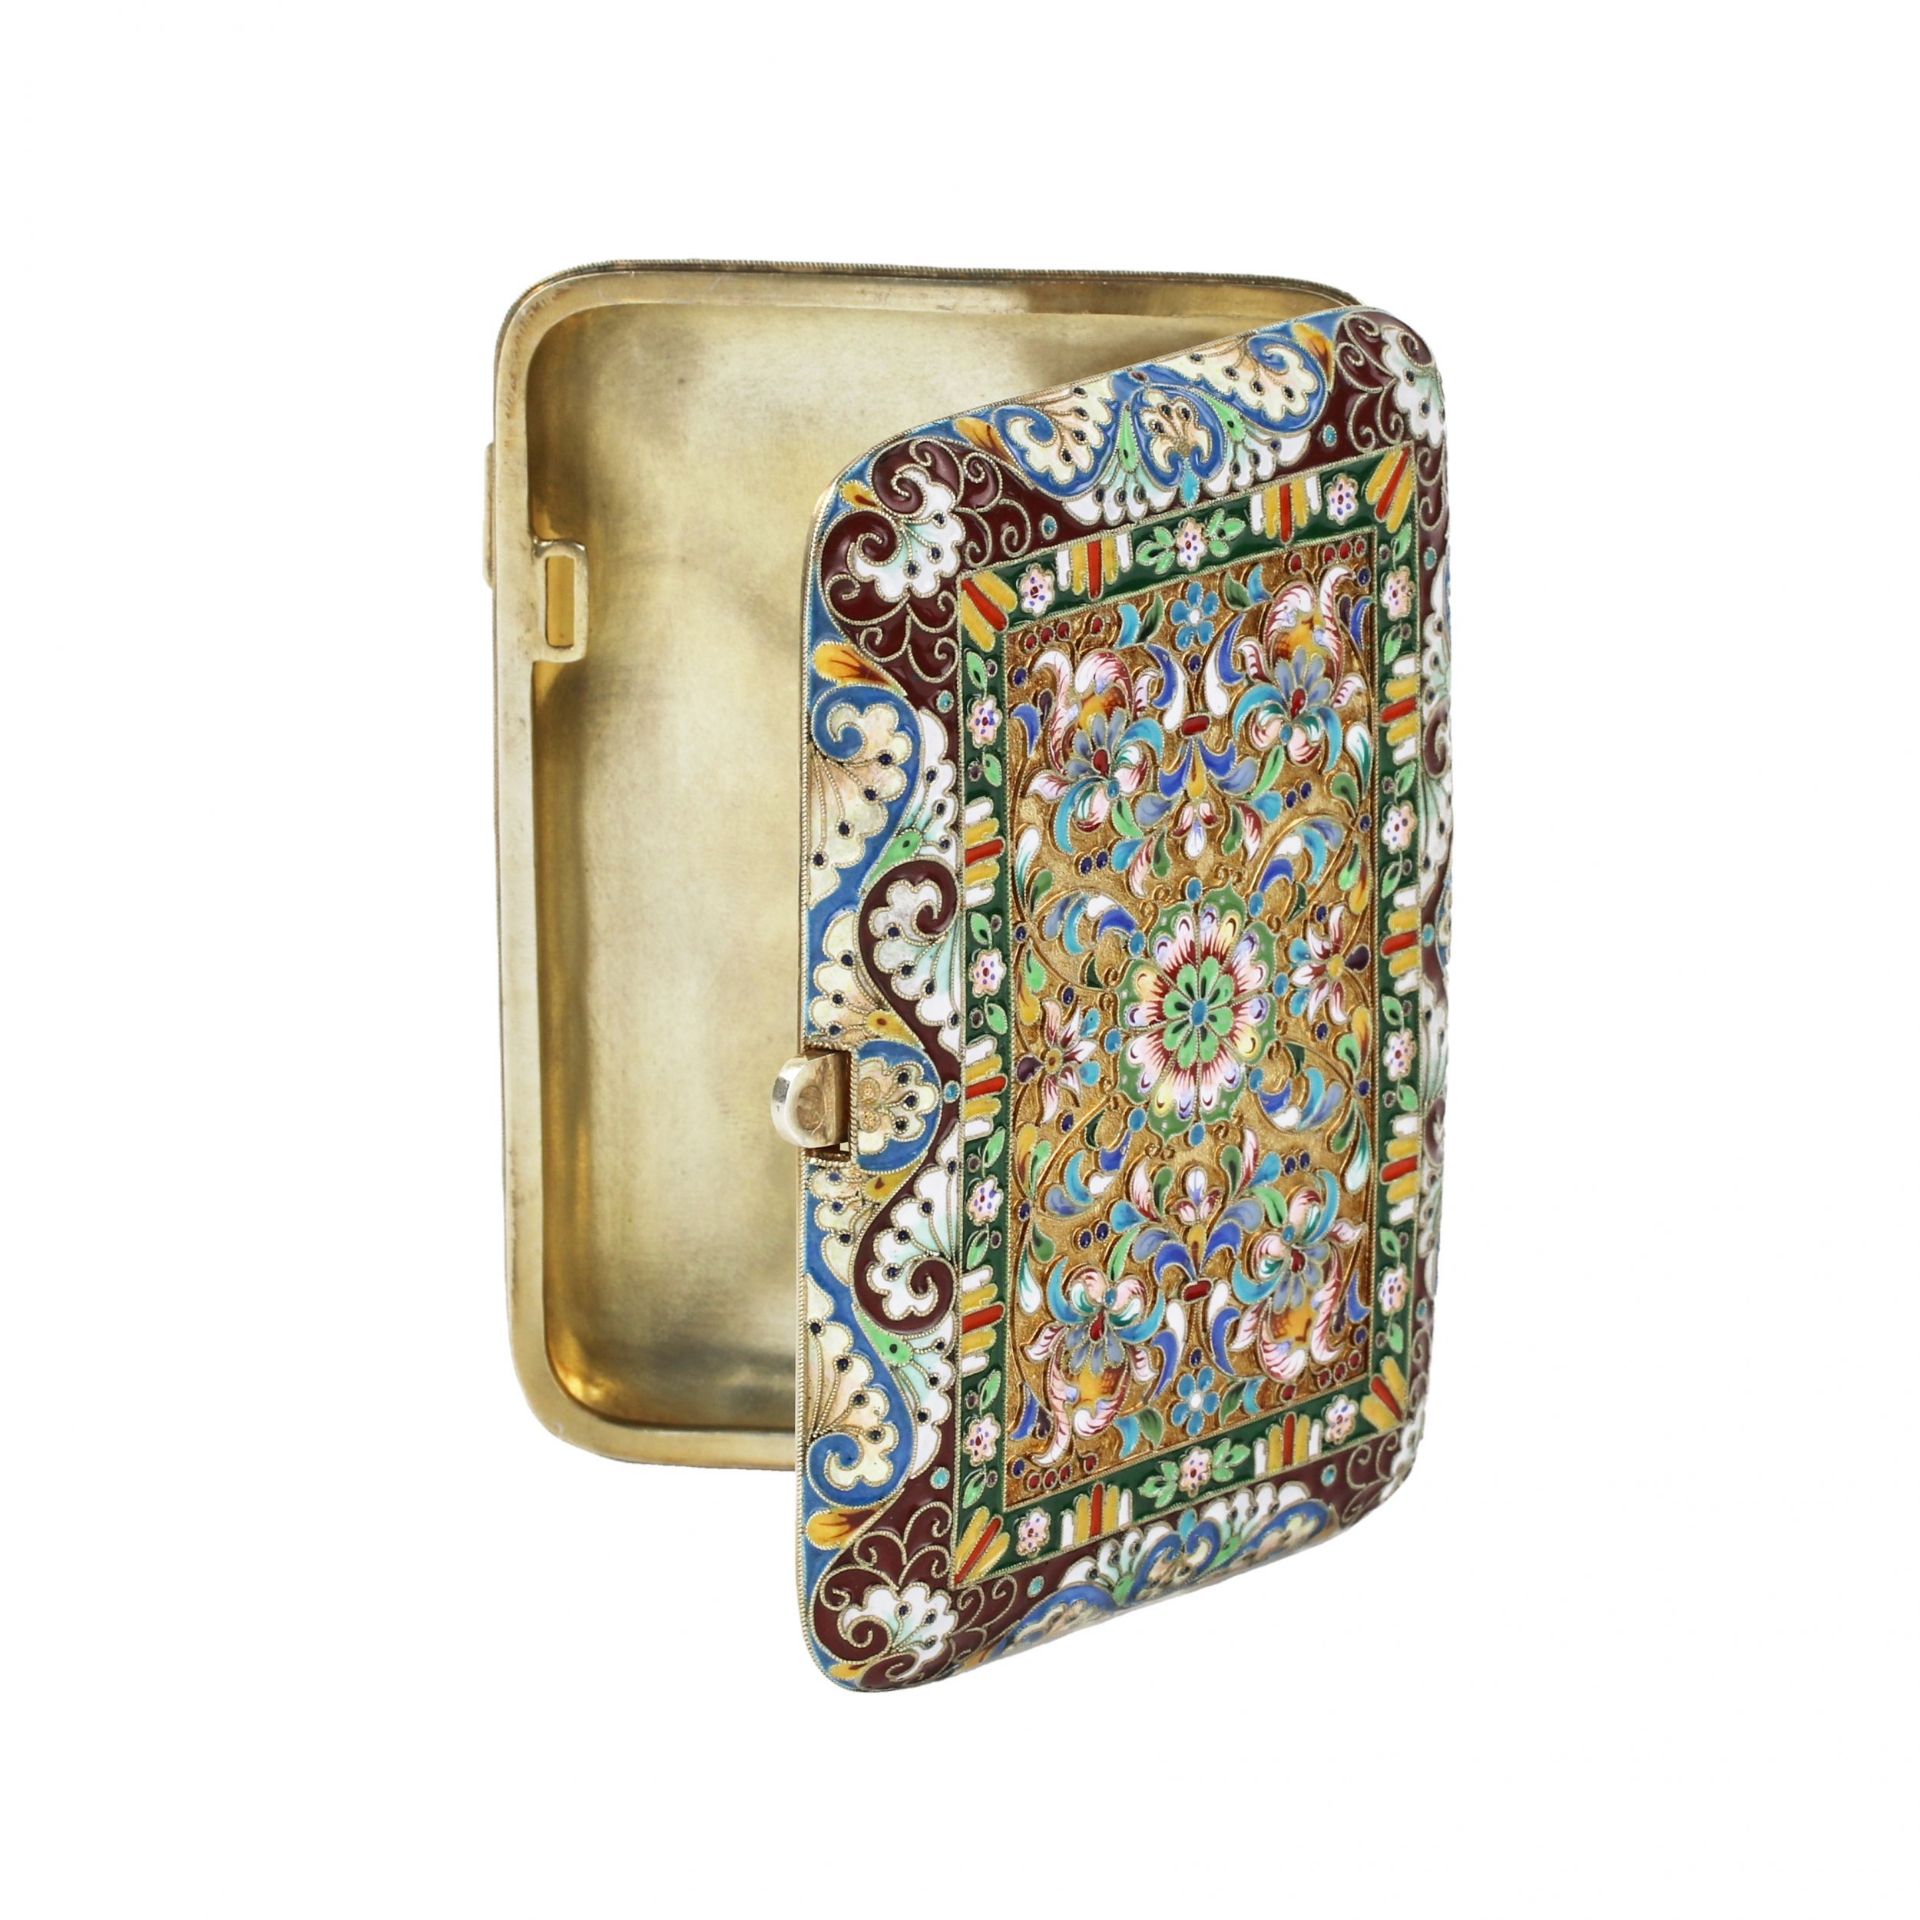 Silver cigarette case with gilding and cloisonne enamel. - Image 4 of 8